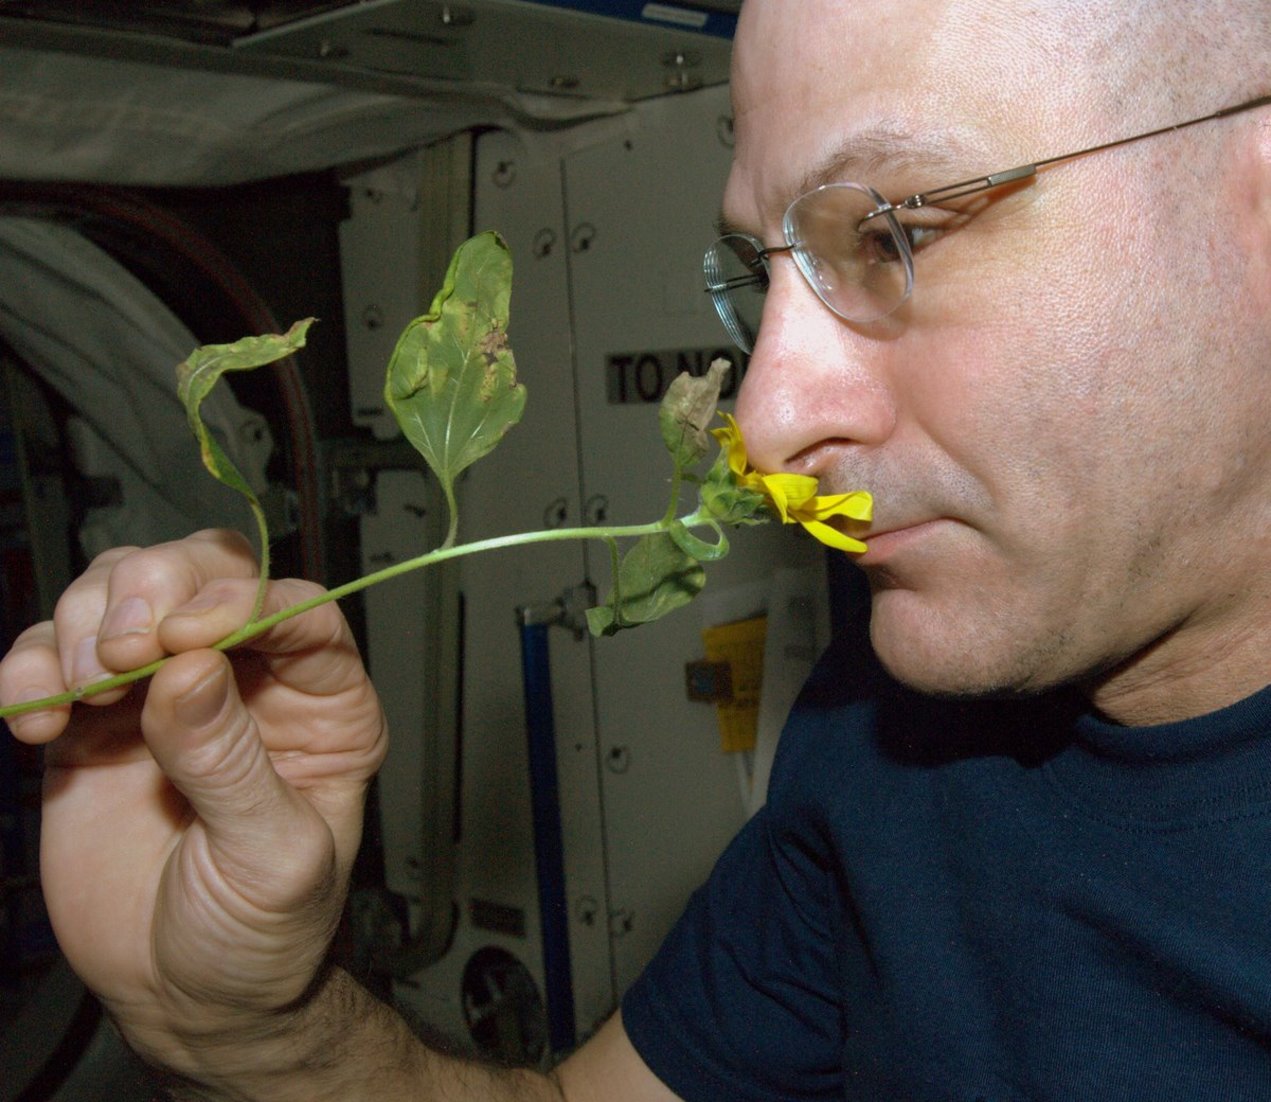 The First Space Flower Bloomed Decades Ago, Not This Week